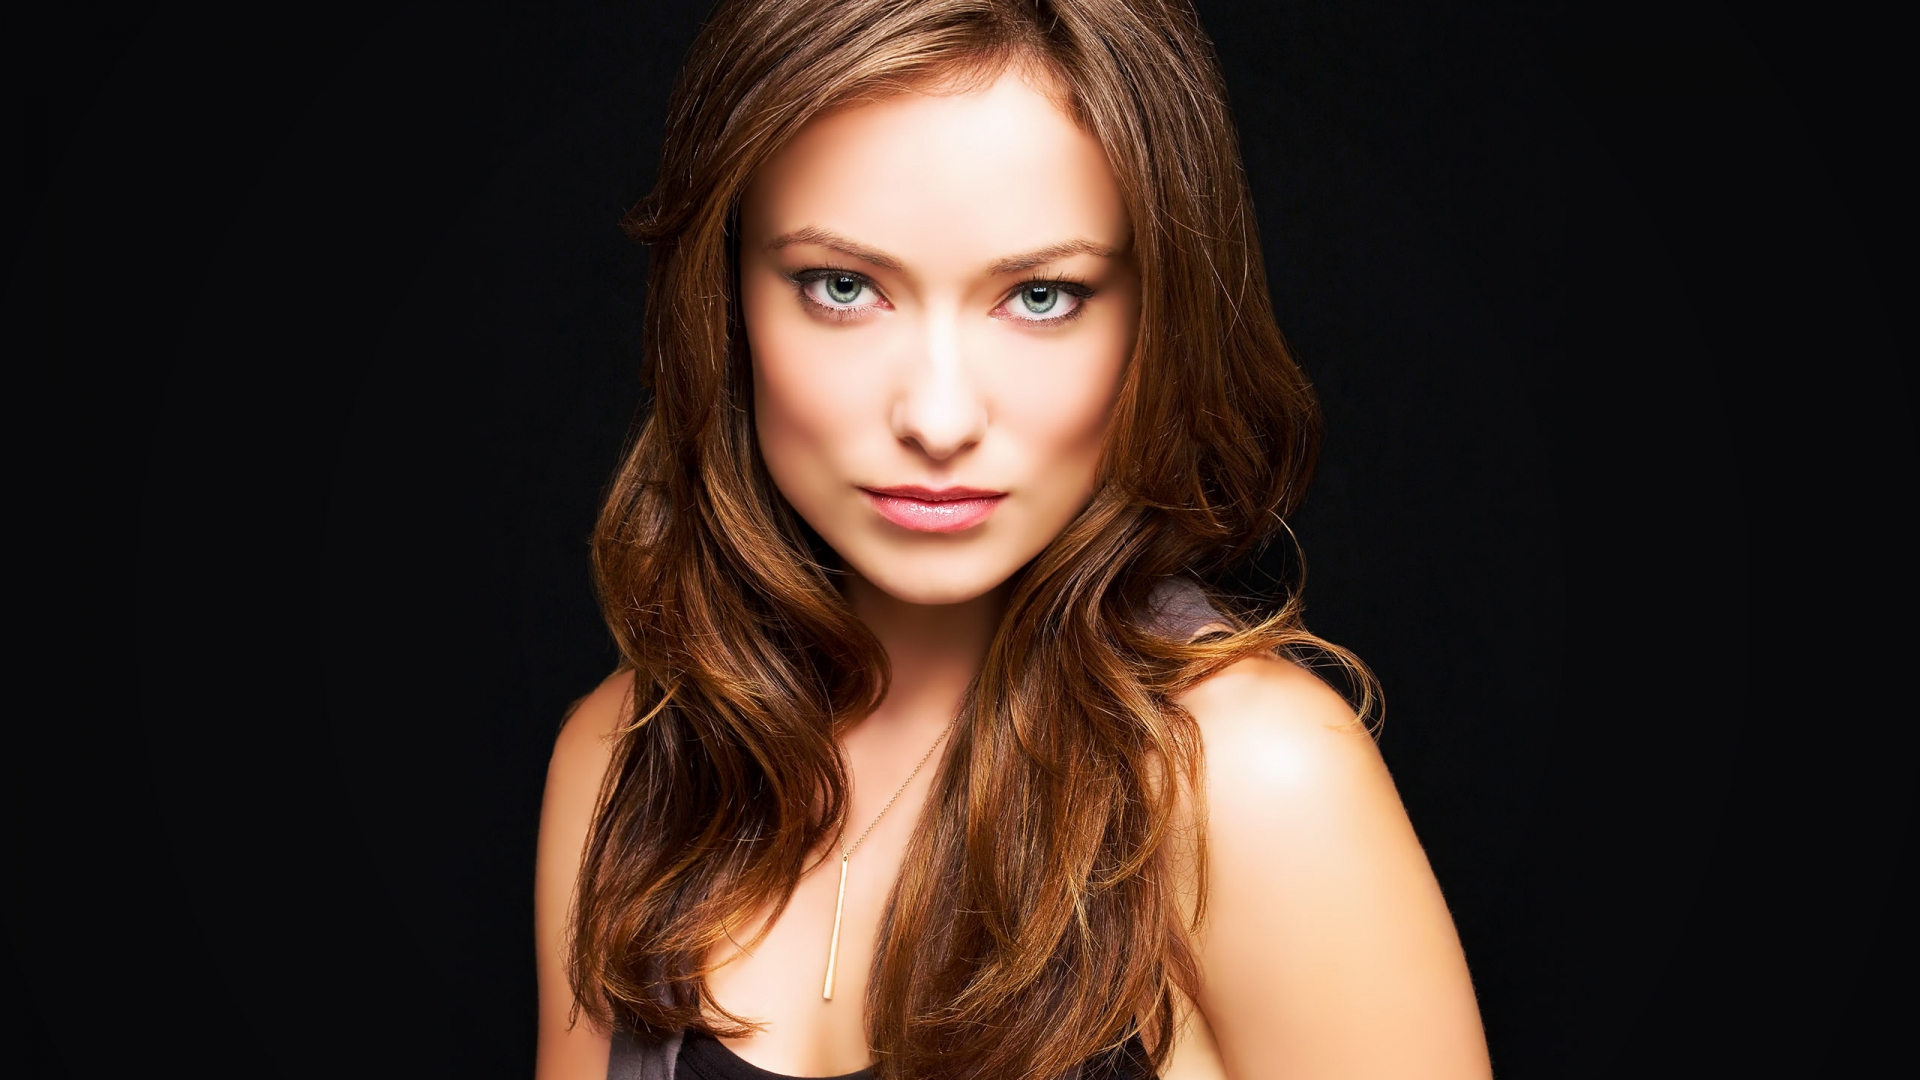 Olivia Wilde Look for 1920 x 1080 HDTV 1080p resolution